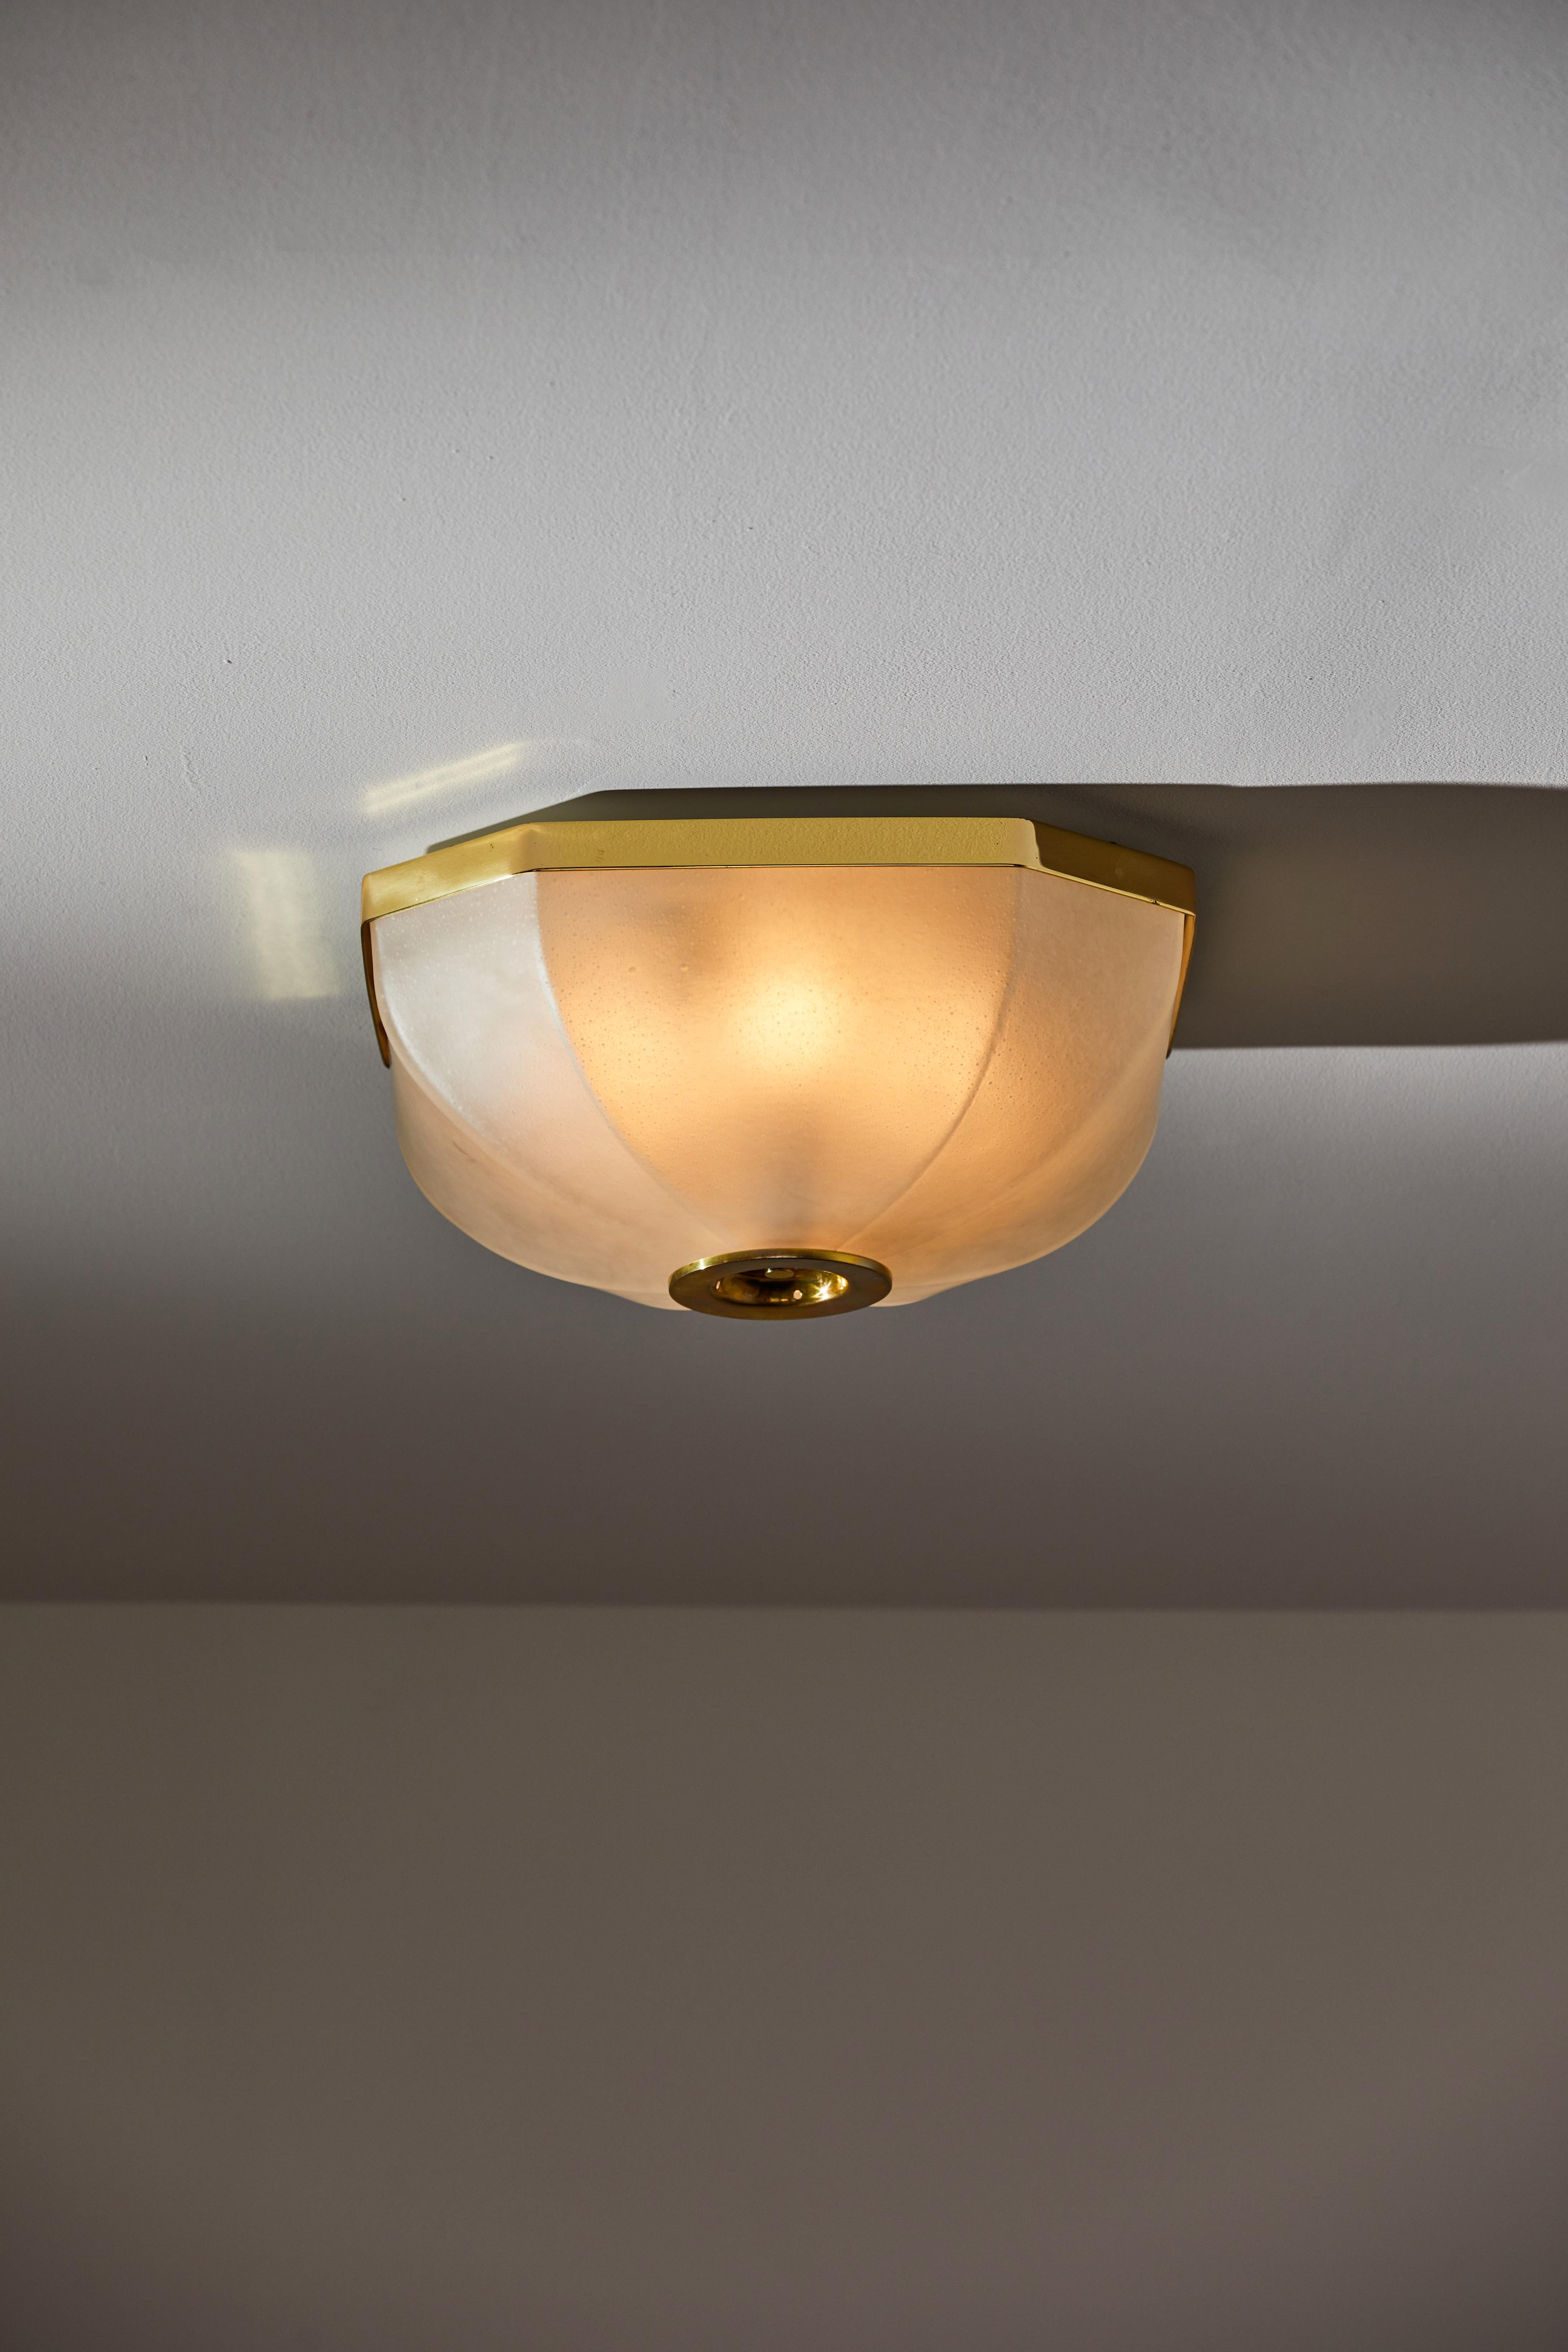 Flush mount ceiling lights by Lumi. Designed and manufactured in Italy, circa 1950s. Glass, brass. Rewired for U.S. standards. We recommend four E27 40w maximum bulbs per light. Bulbs are included as a one-time courtesy. Sold individually and not as